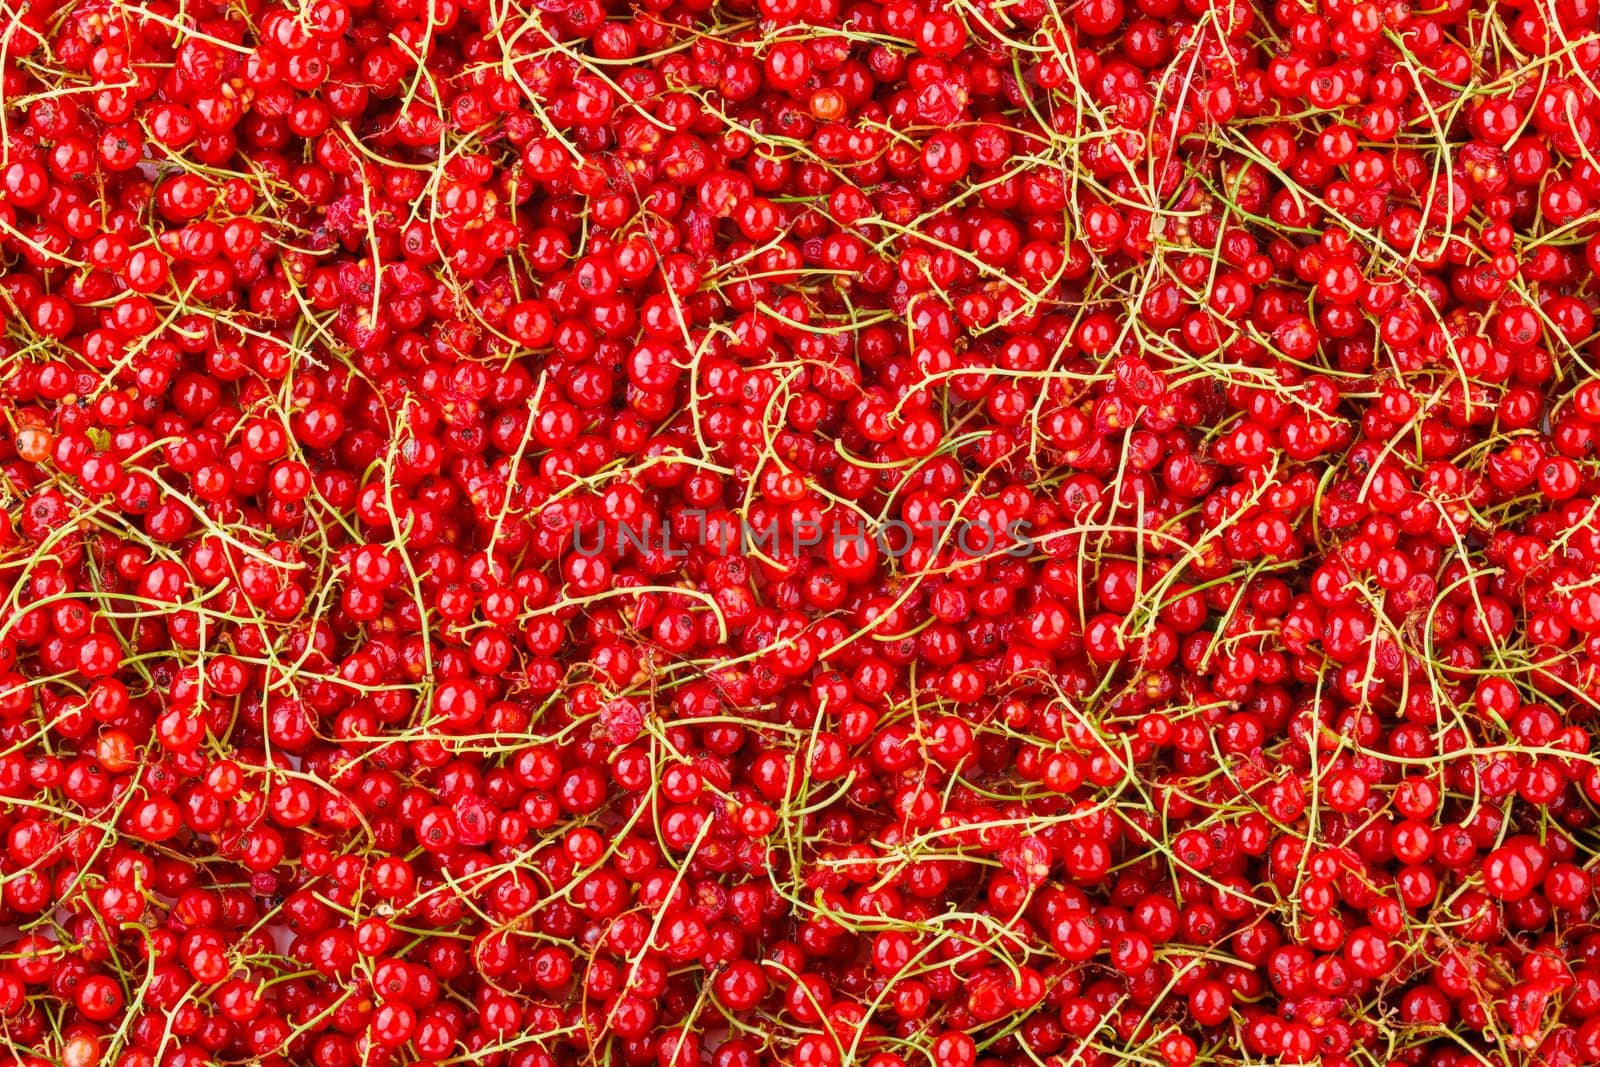 full-frame background and texture of red currants pile in high angle view.